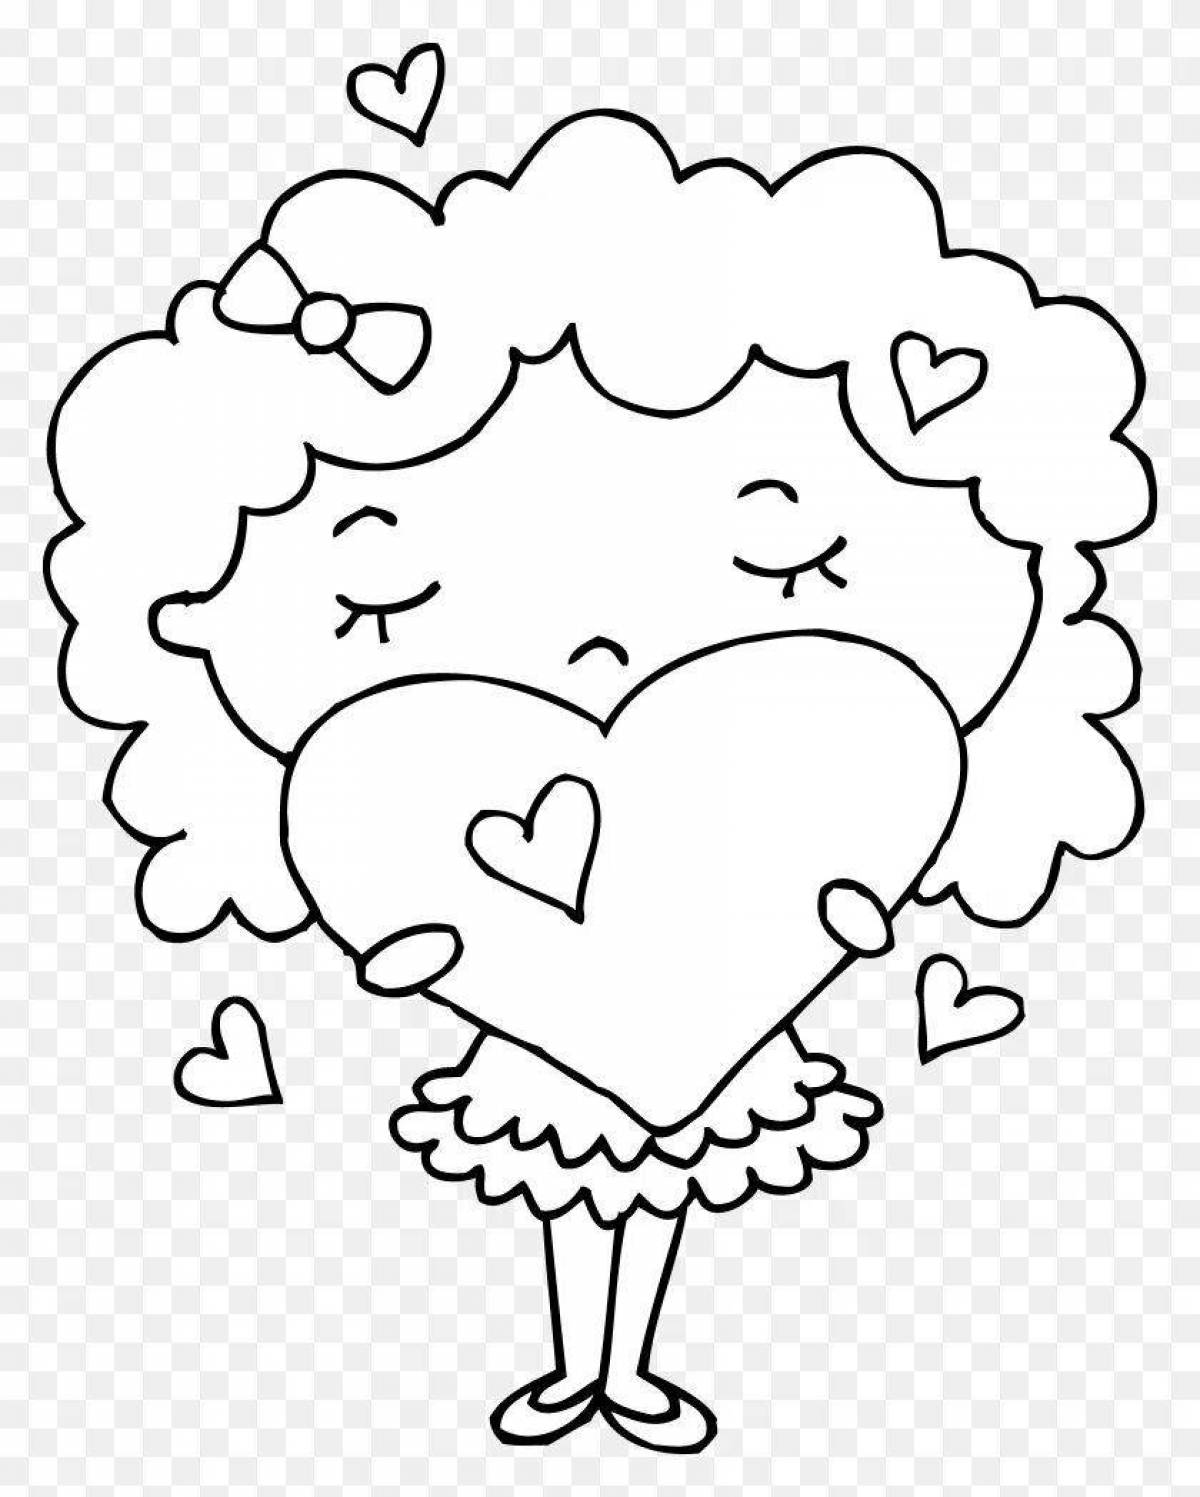 Adorable heart and star coloring page